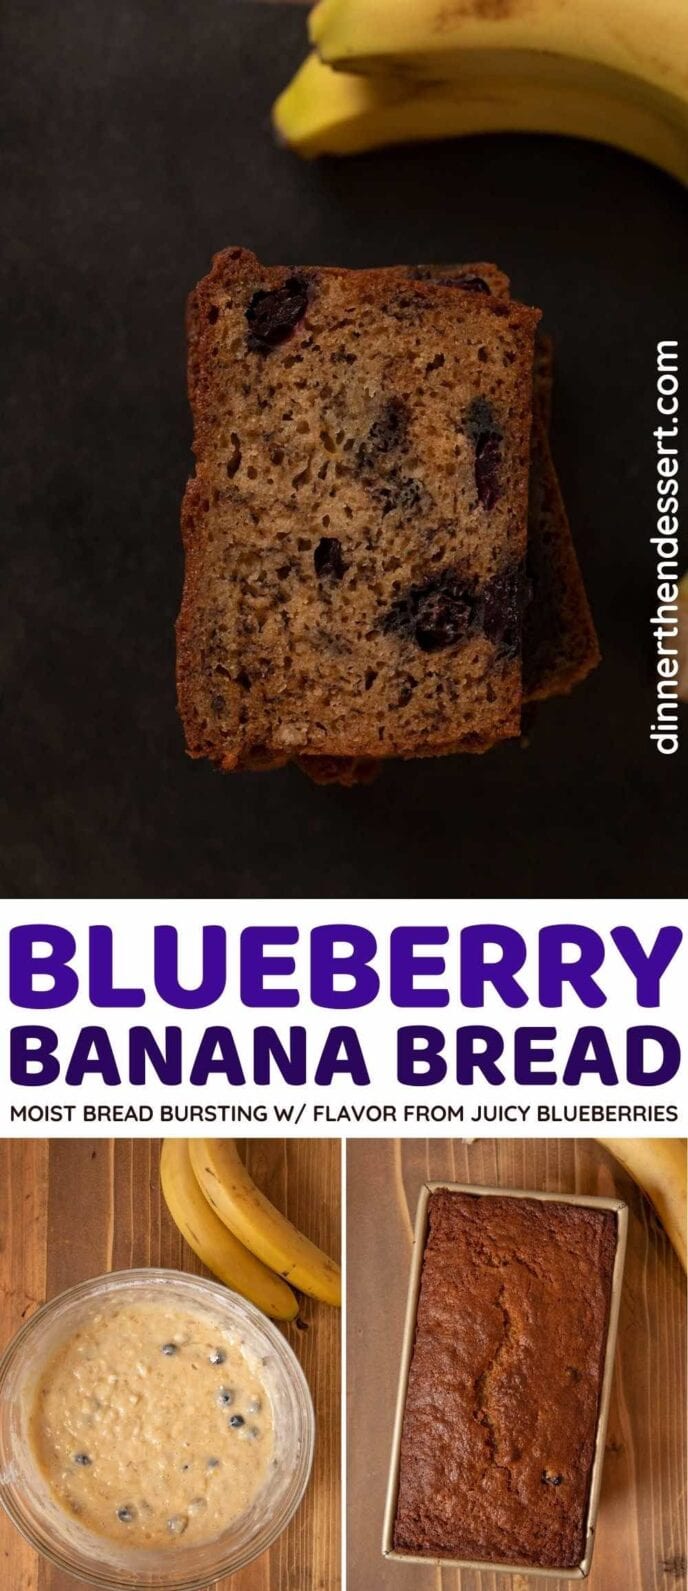 Blueberry Banana Bread collage